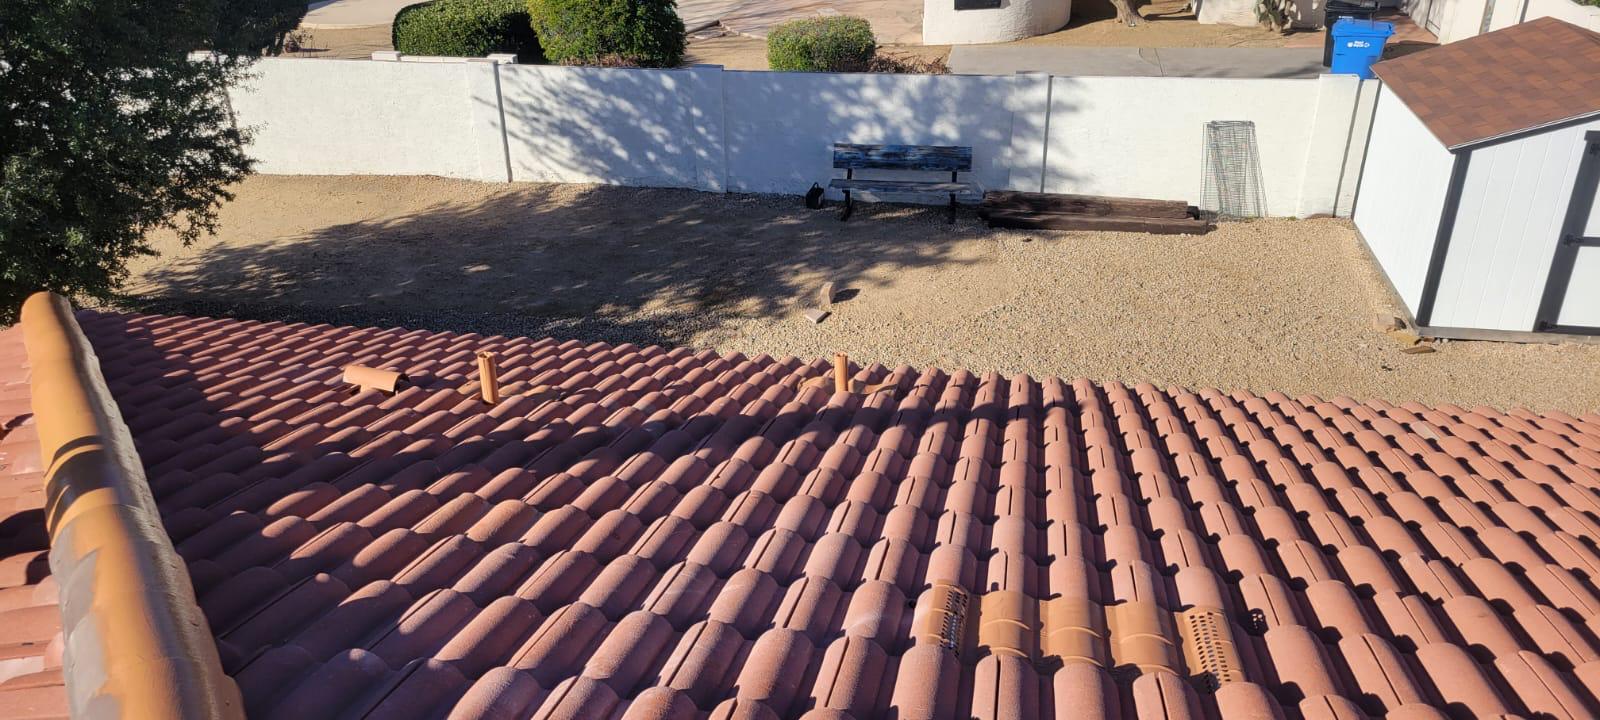 Behmer roofer aligning tiles with expertise for a re-felt project in the Estancia neighborhood.